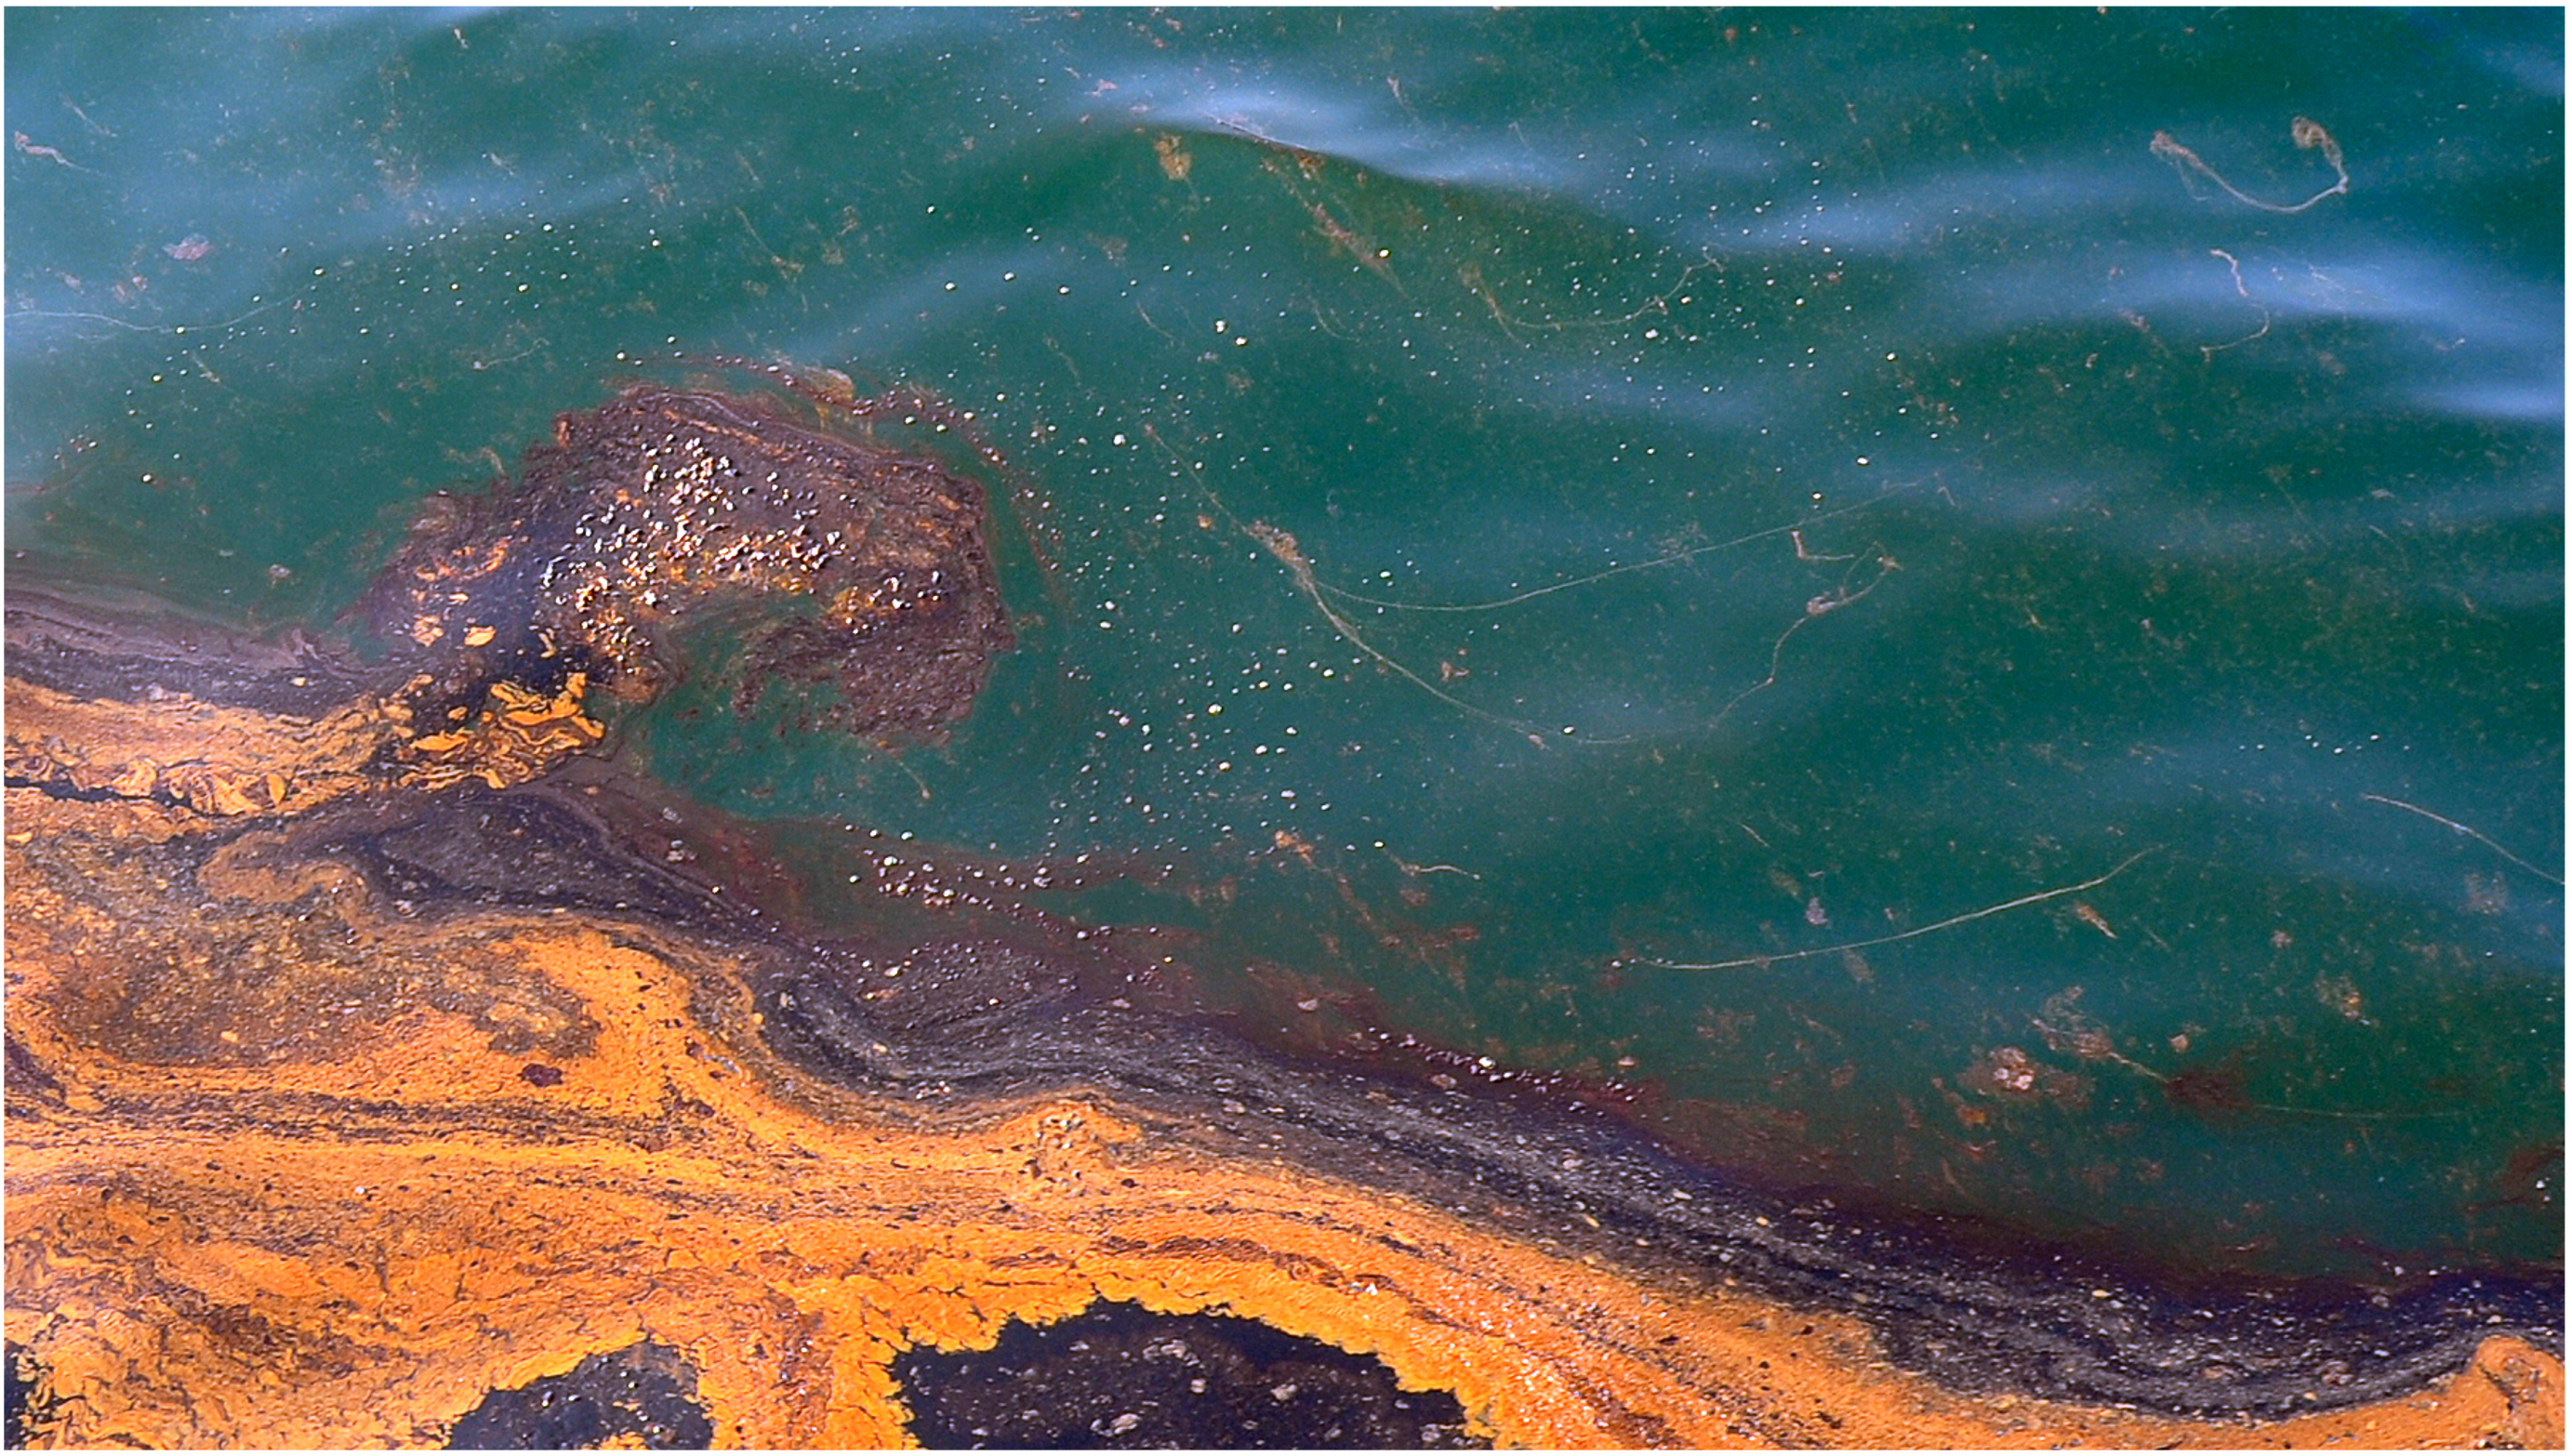 Oil exposed to sunlight on the surface of the Gulf of Mexico during the Deepwater Horizon spill (2010)